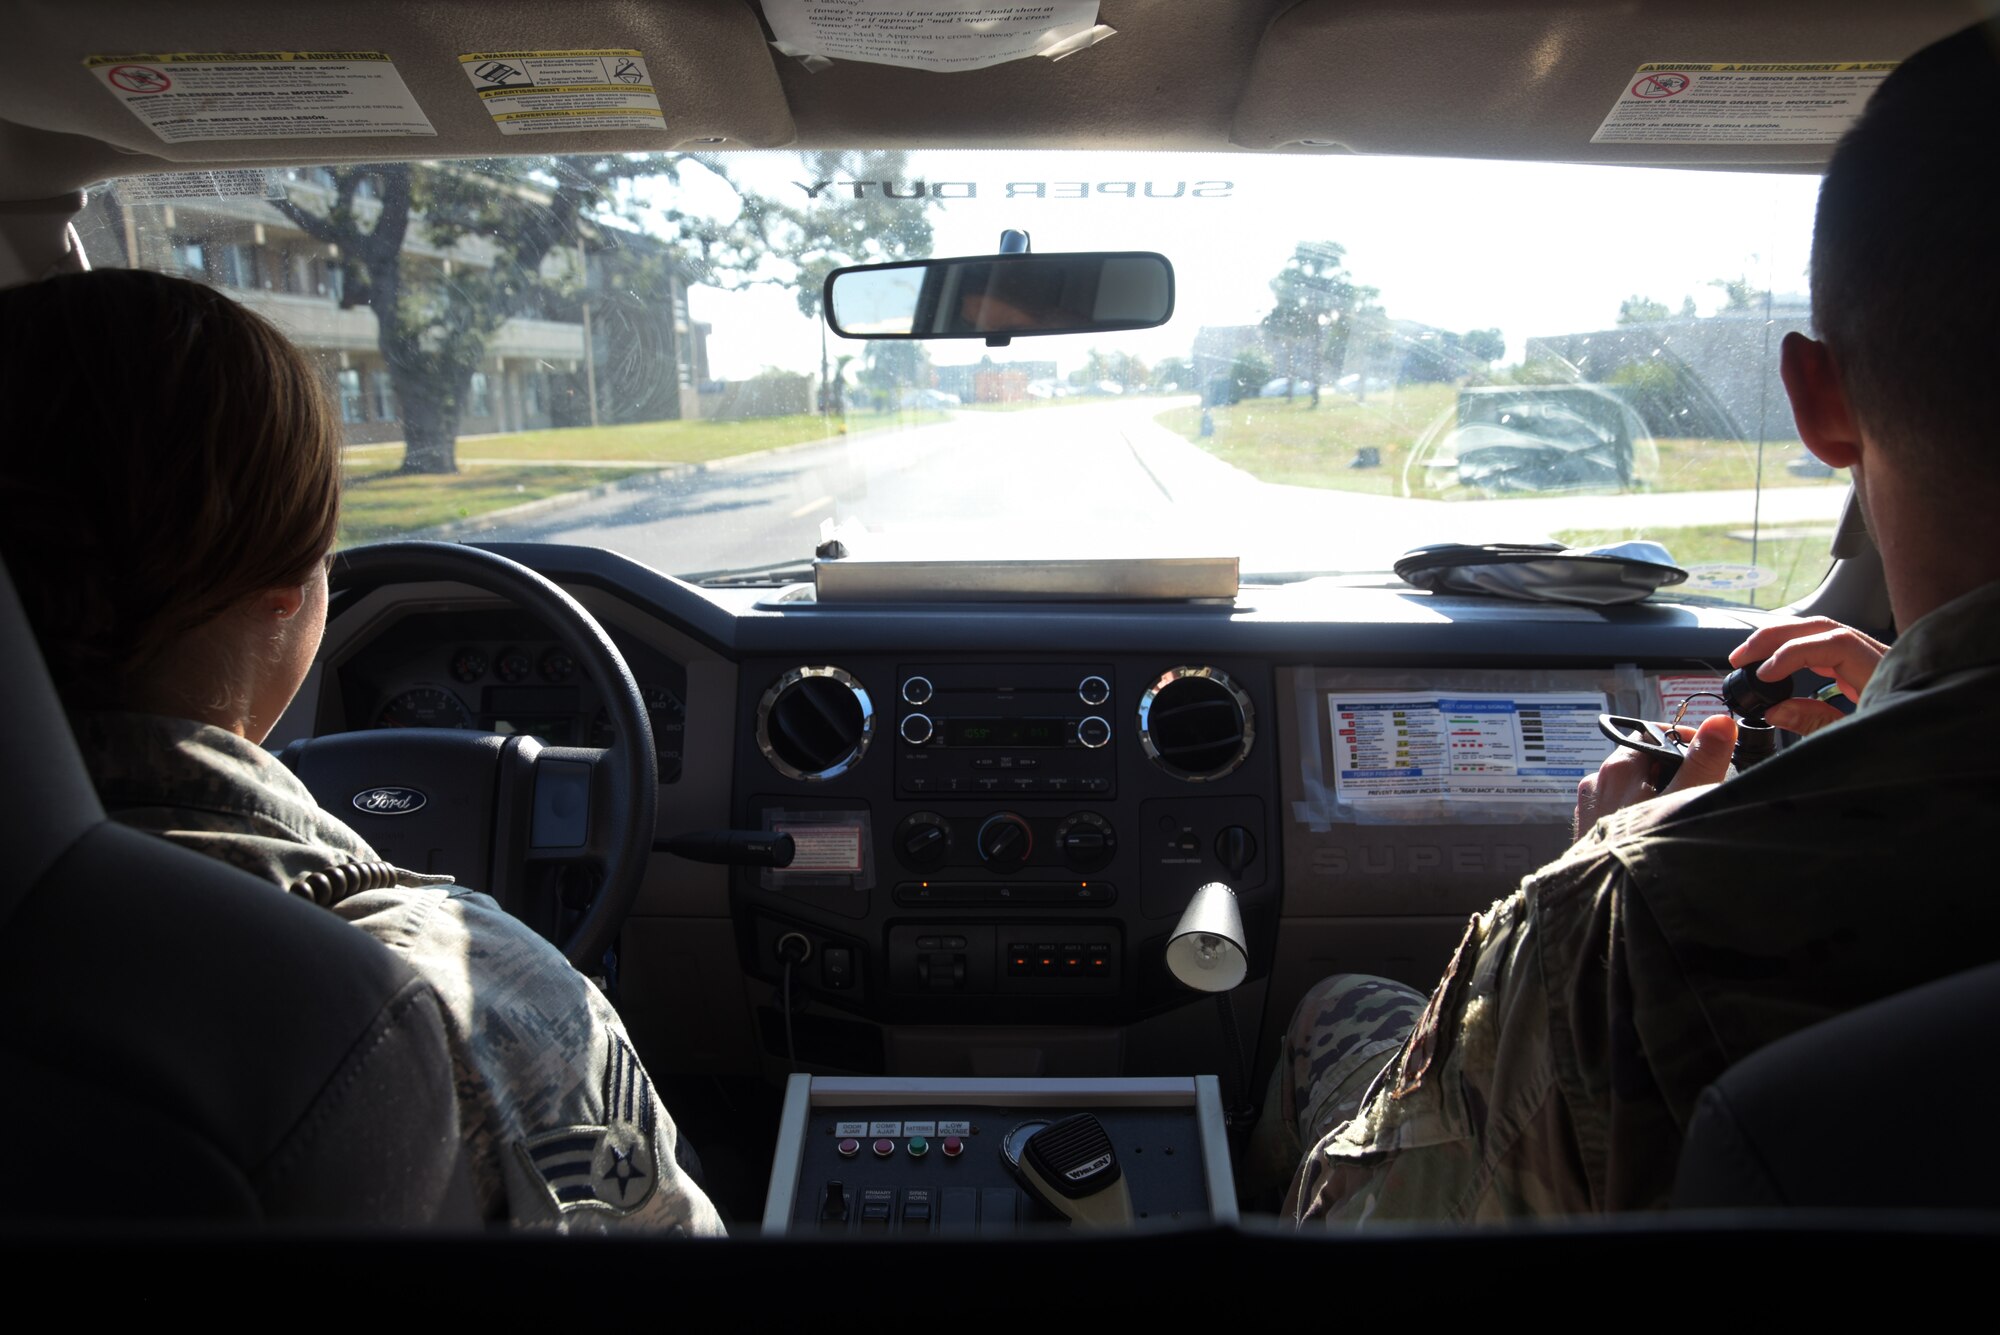 Senior Airman Deliz Aguilera, left, and 1st Lt. Chase Walker, 325th Operational Medical Readiness Squadron Ambulance Services Department medics, head out to an emergency medical response exercise Oct. 4, 2019, at Tyndall Air Force Base, Florida. The 325th OMRS had initiated a simulation to practice response, transportation, and providing basic emergency medical service when patient care is needed for heat exhaustion. (U.S. Air Force photo by Staff Sgt. Magen M. Reeves)